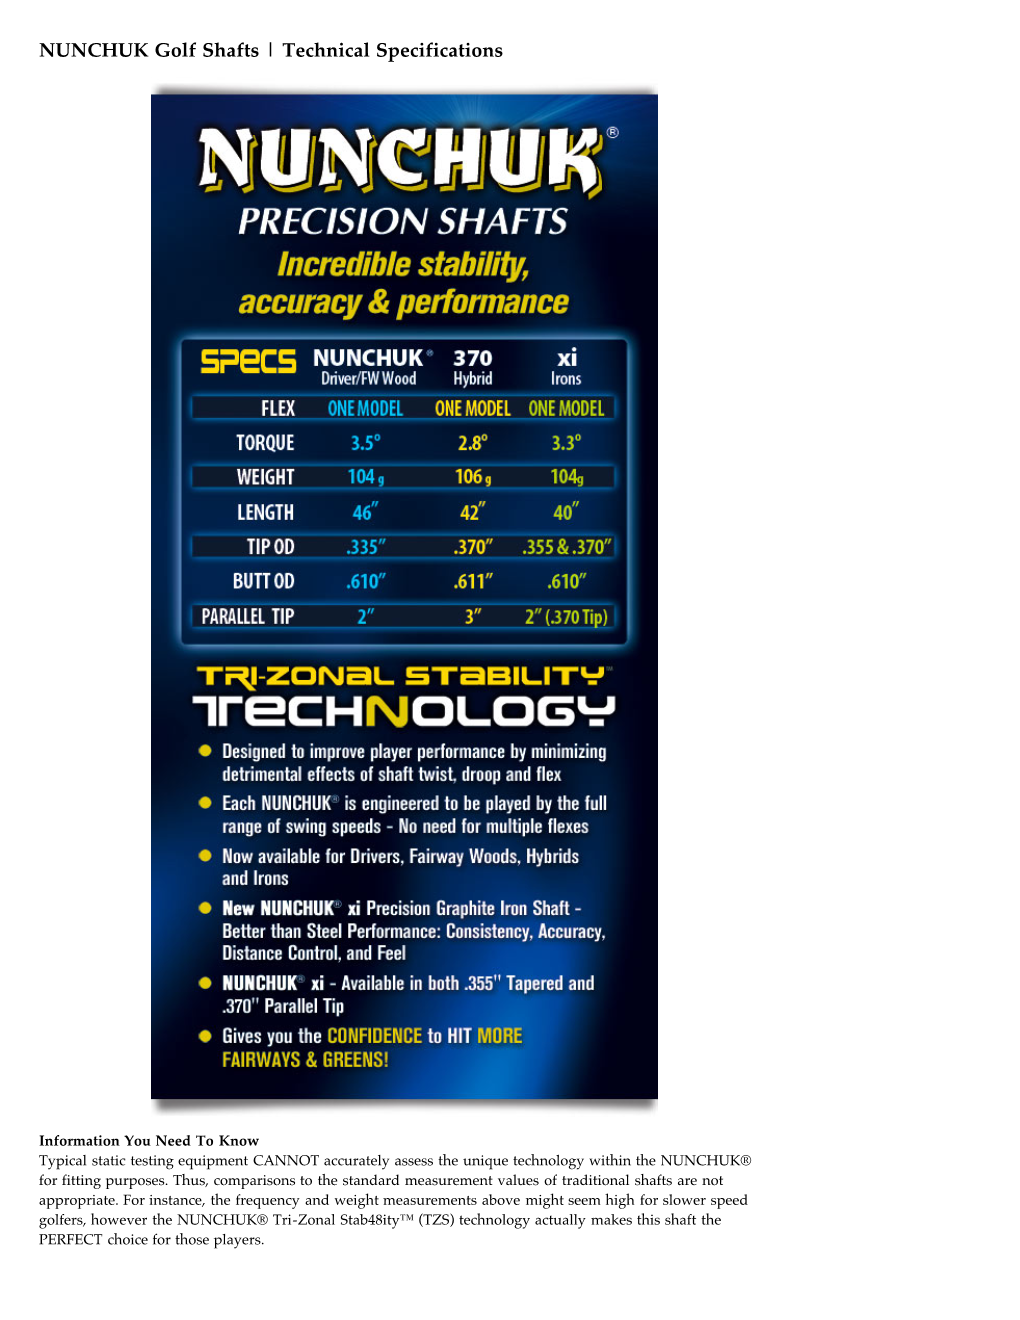 Nunchuk Golf Shafts Technical Specifications and Club Building